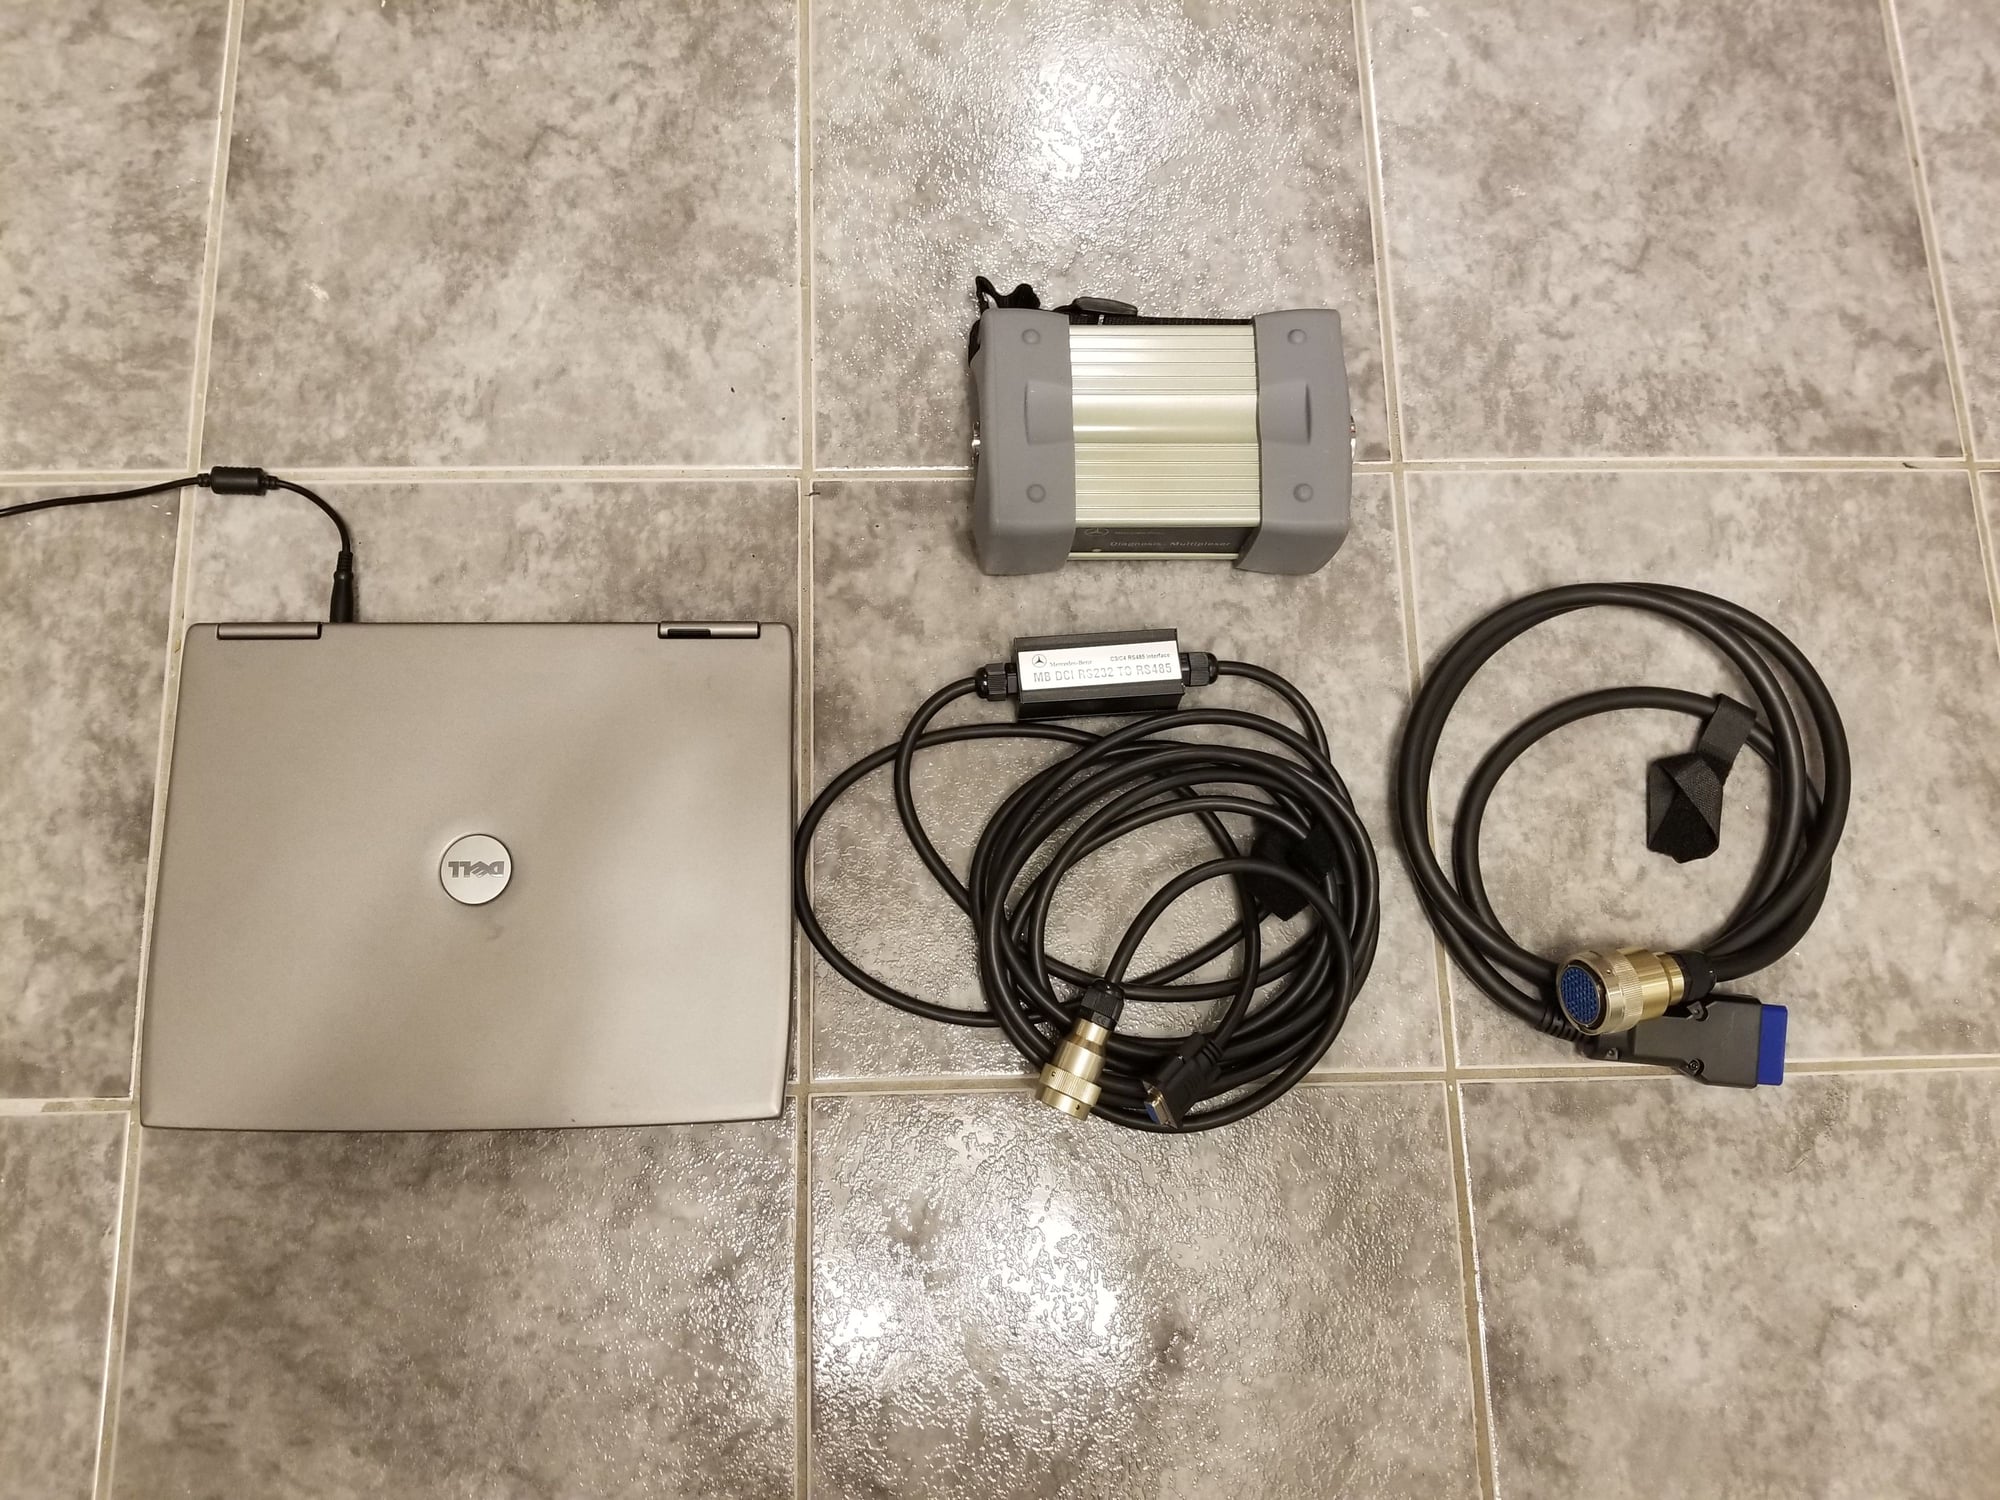 Audio Video/Electronics - Star Diagnostics with Dell D600 with software and cables - Complete kit - Used - New York, NY 10011, United States